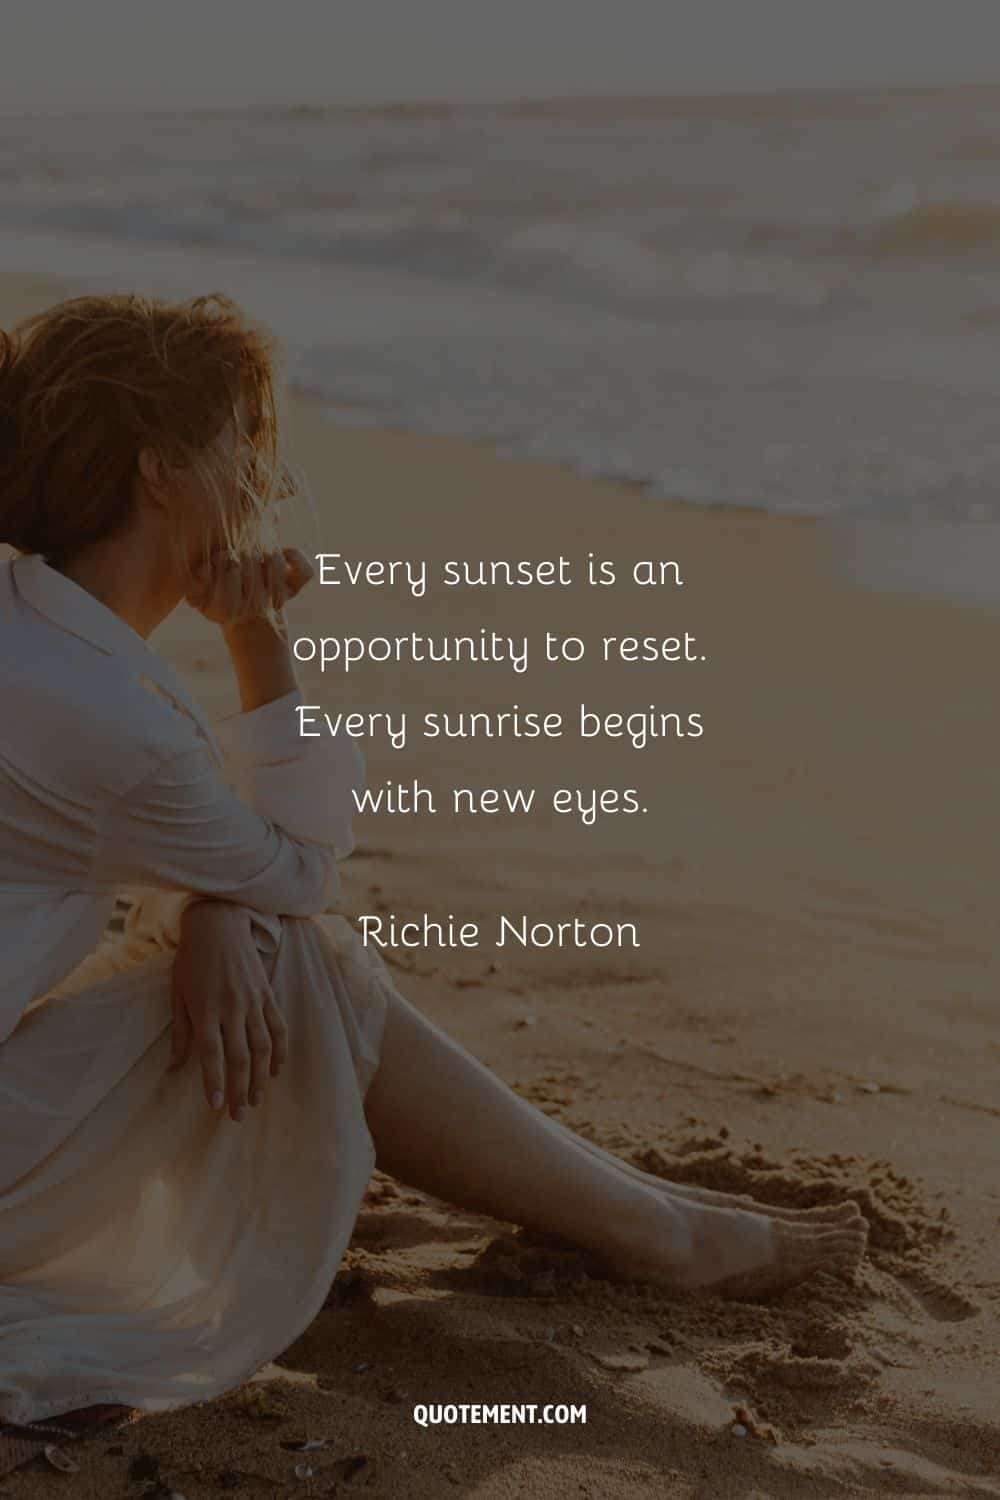 “Every sunset is an opportunity to reset. Every sunrise begins with new eyes.” — Richie Norton